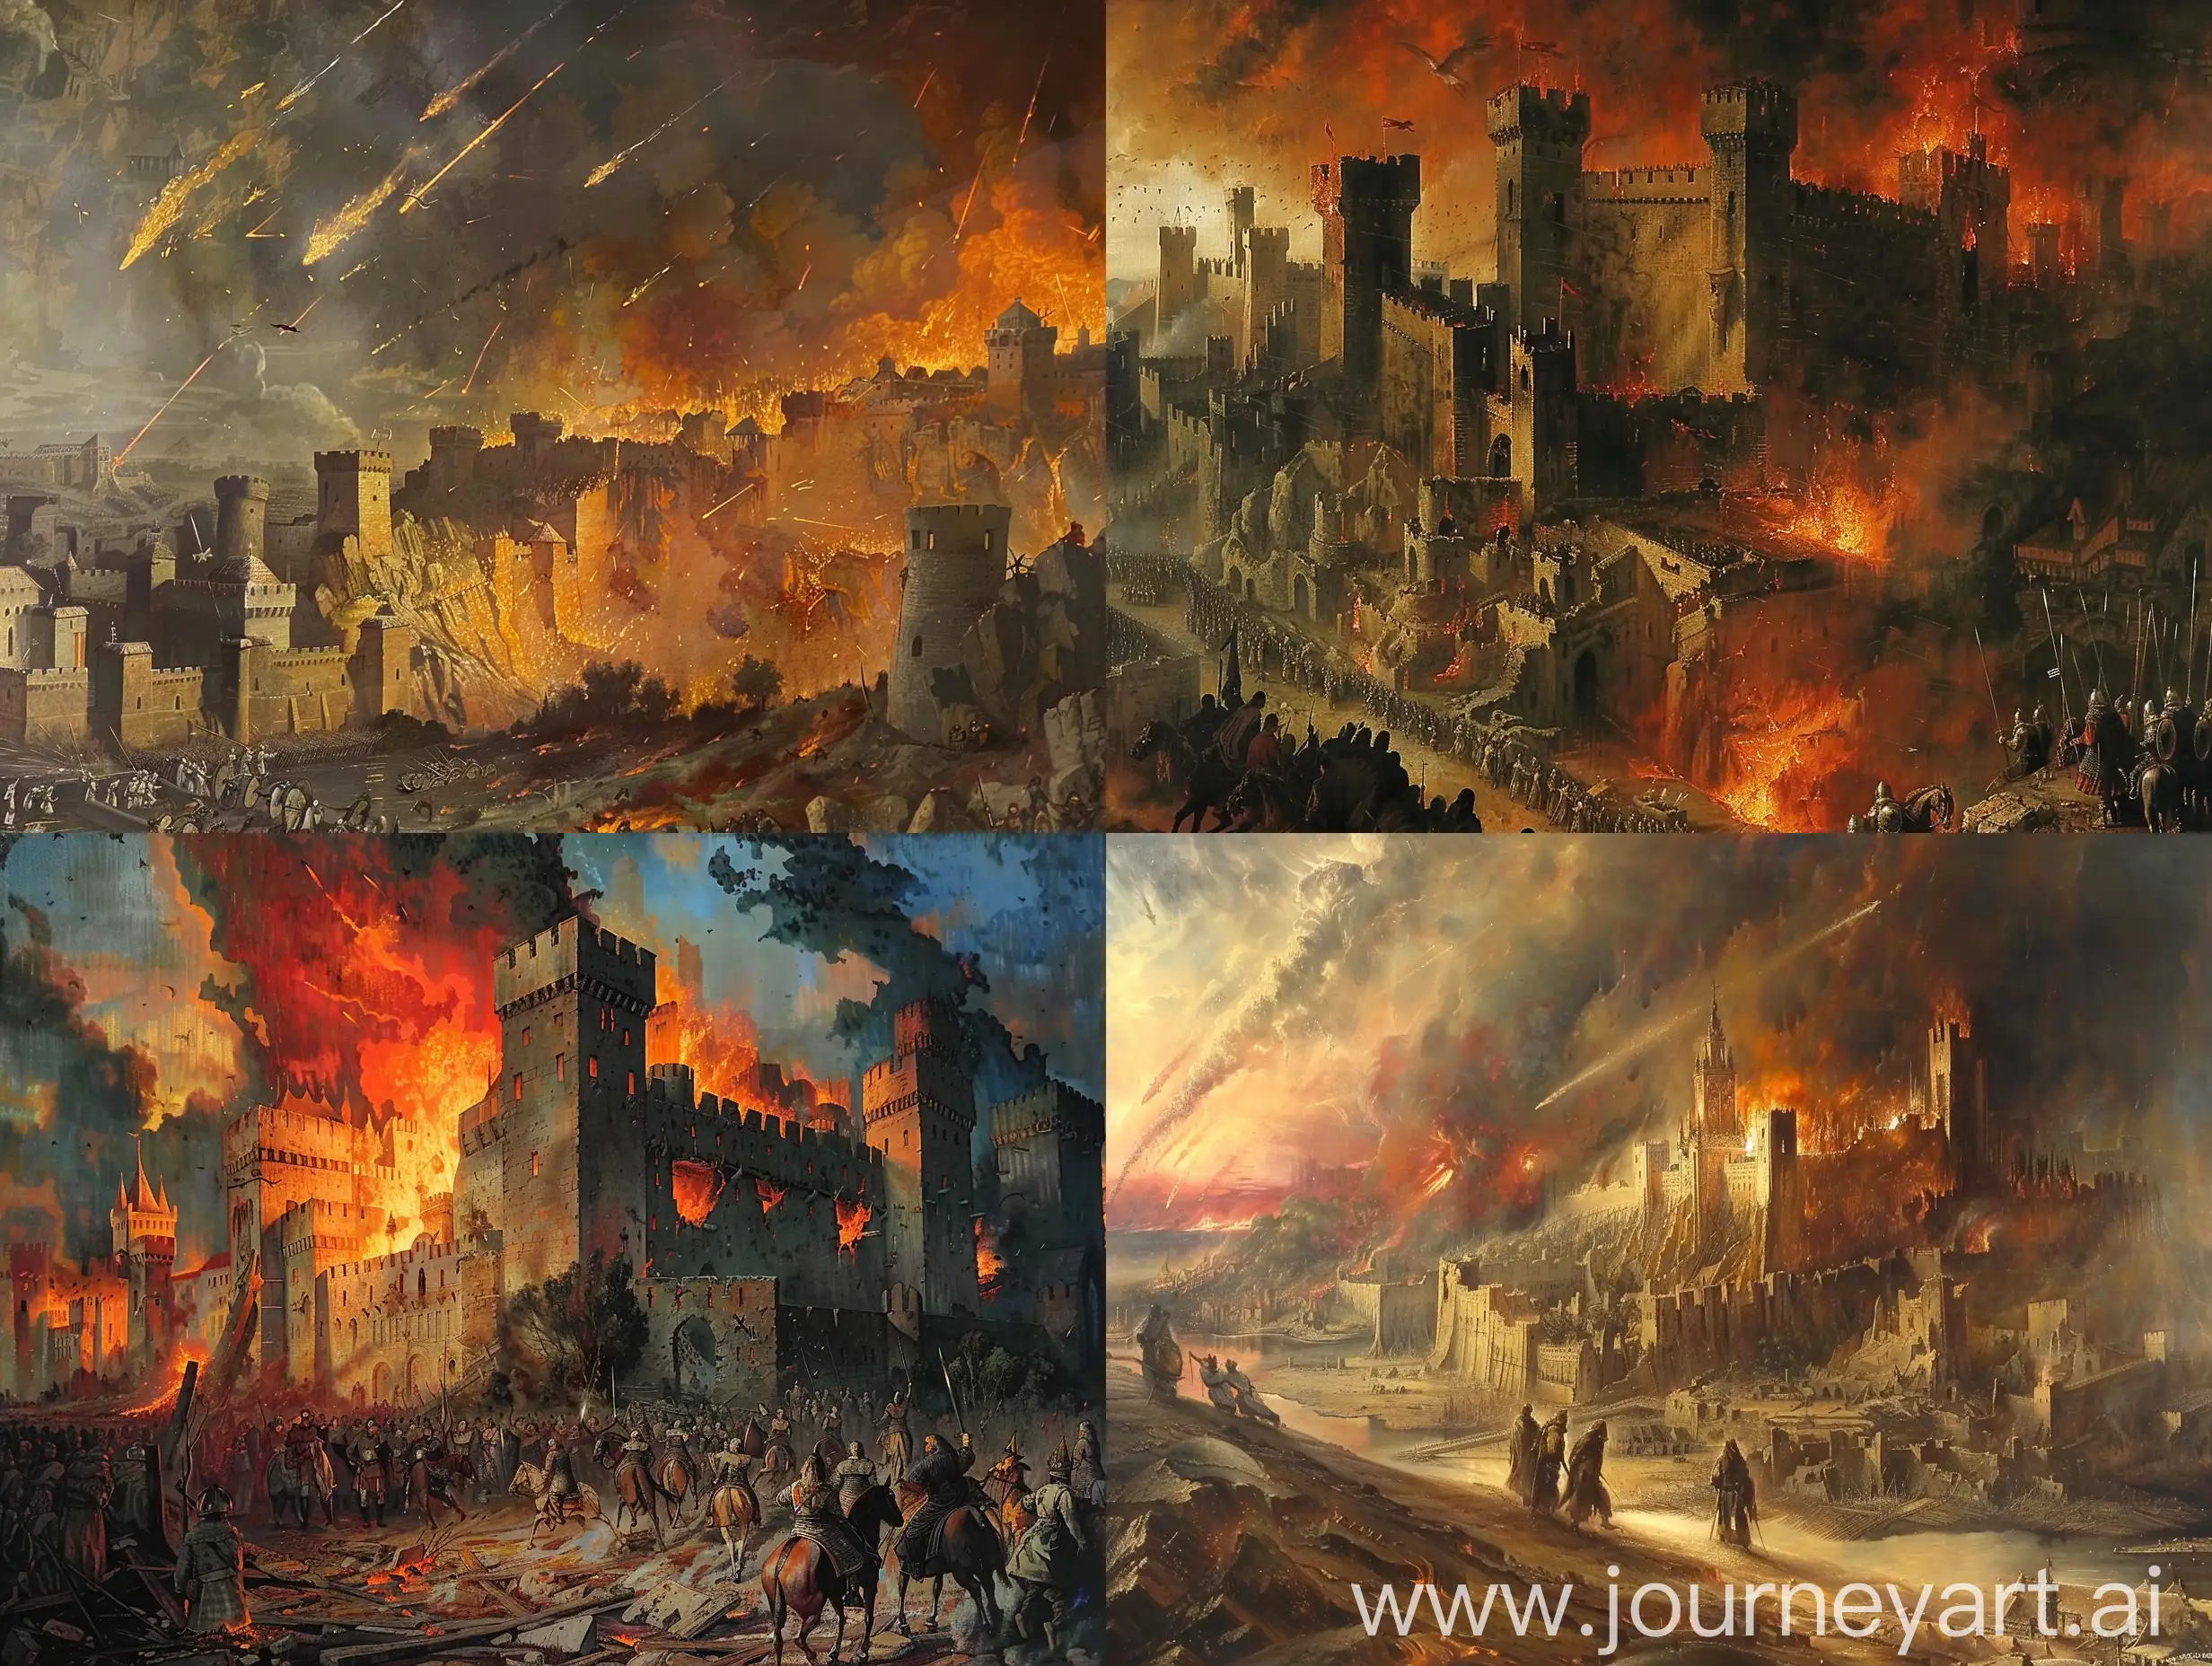 In 1347, a catastrophic event unfolded that would alter the course of history